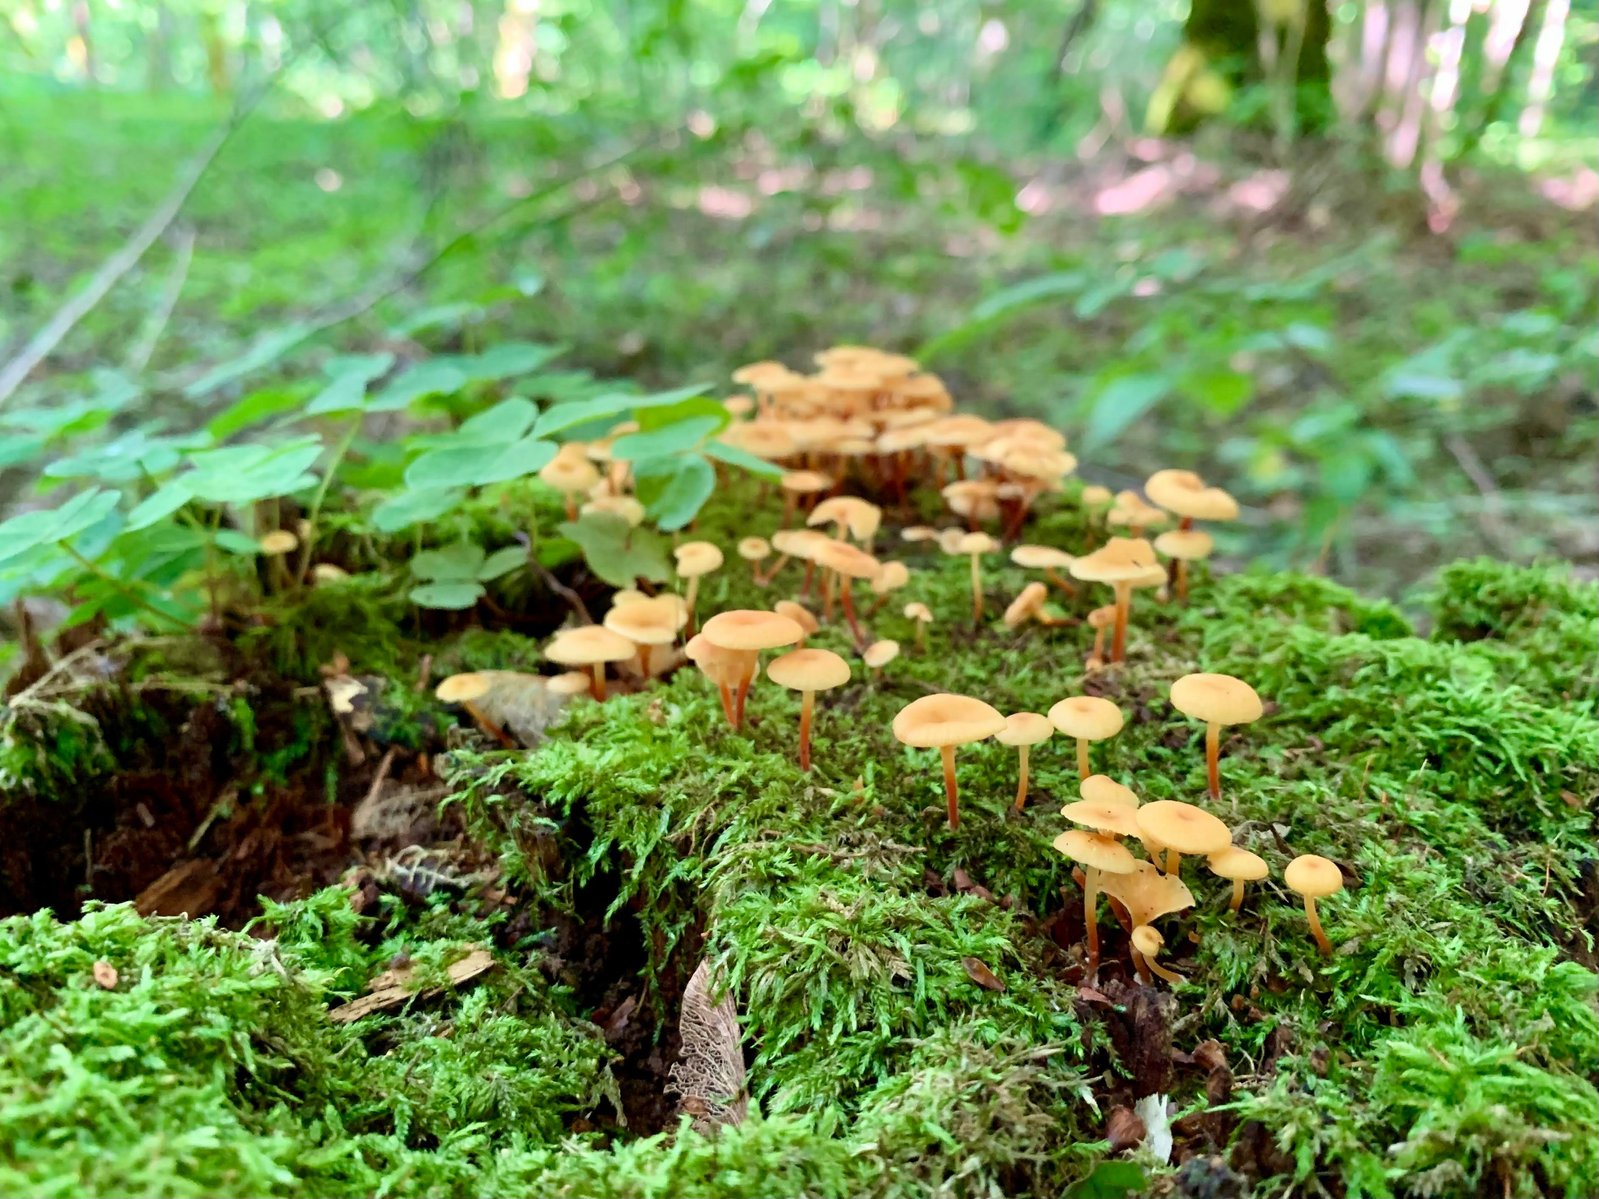 Tiny and delicate yellow mushrooms emerging from the lush green moss, creating a captivating sight in the forest.